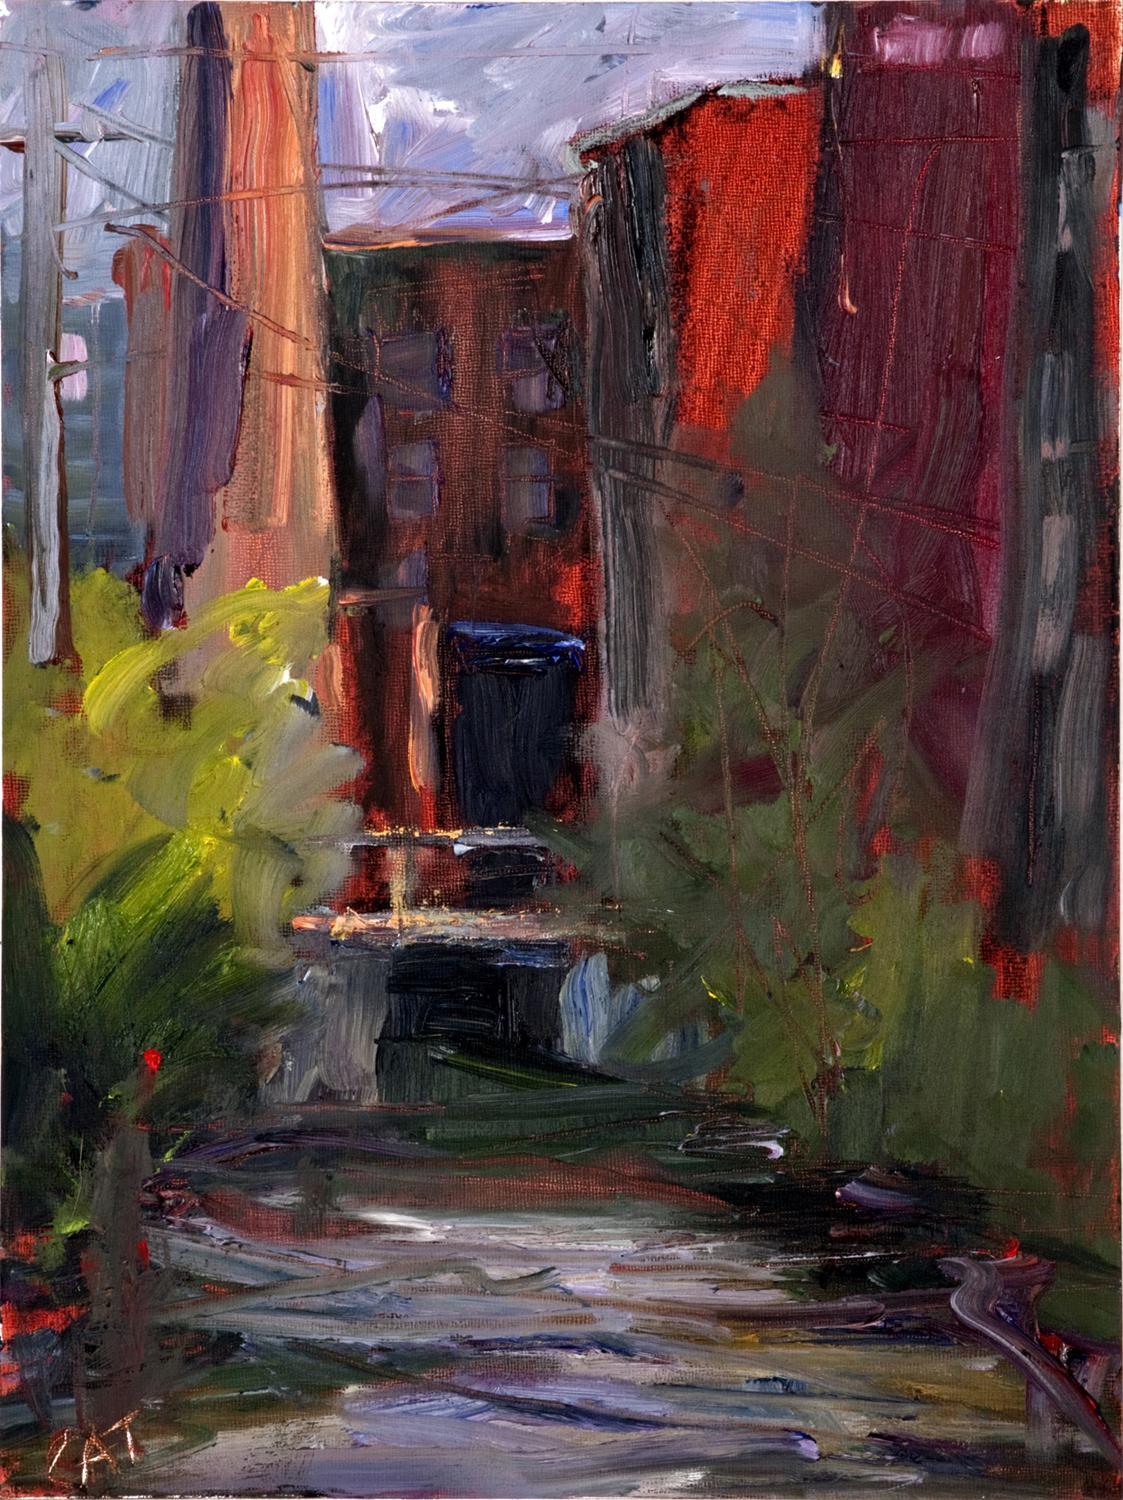 "Studio Canal", urban, factory, textural, oranges, reds, blue, oil painting